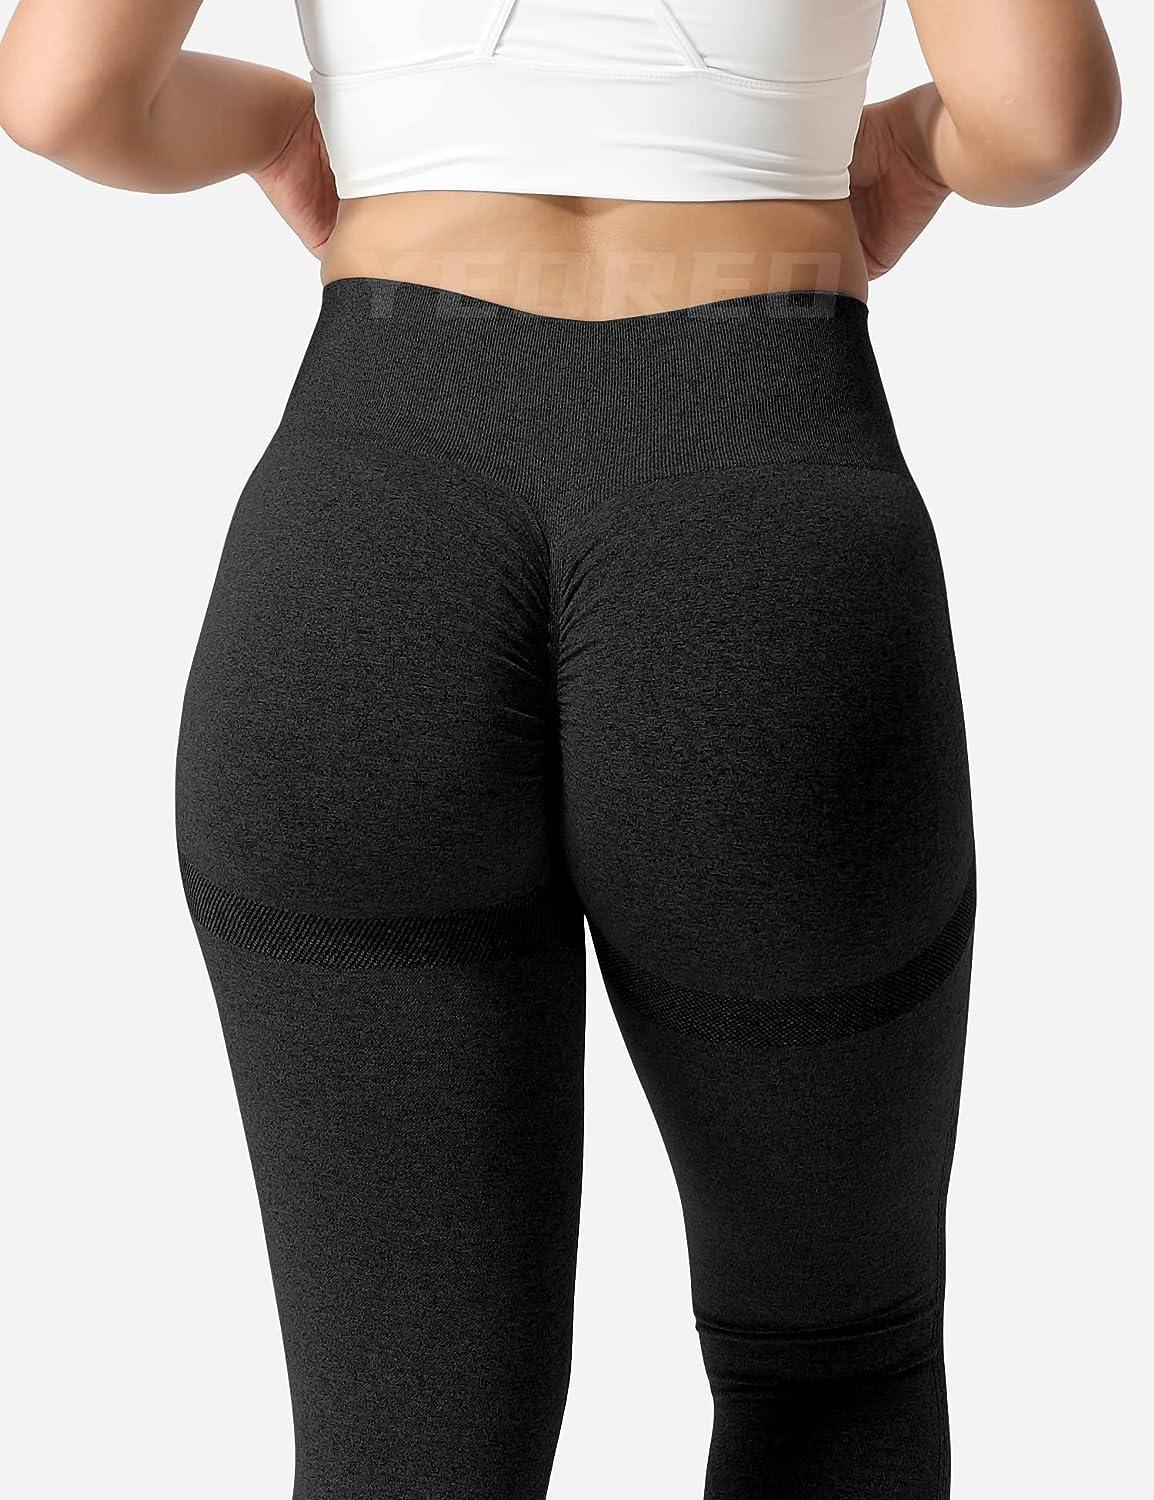 YEOREO Scrunch Butt Lift Leggings for Women Workout Yoga Pants Ruched Booty  High Waist Seamless Leggings Compression Tights #1 Black Medium